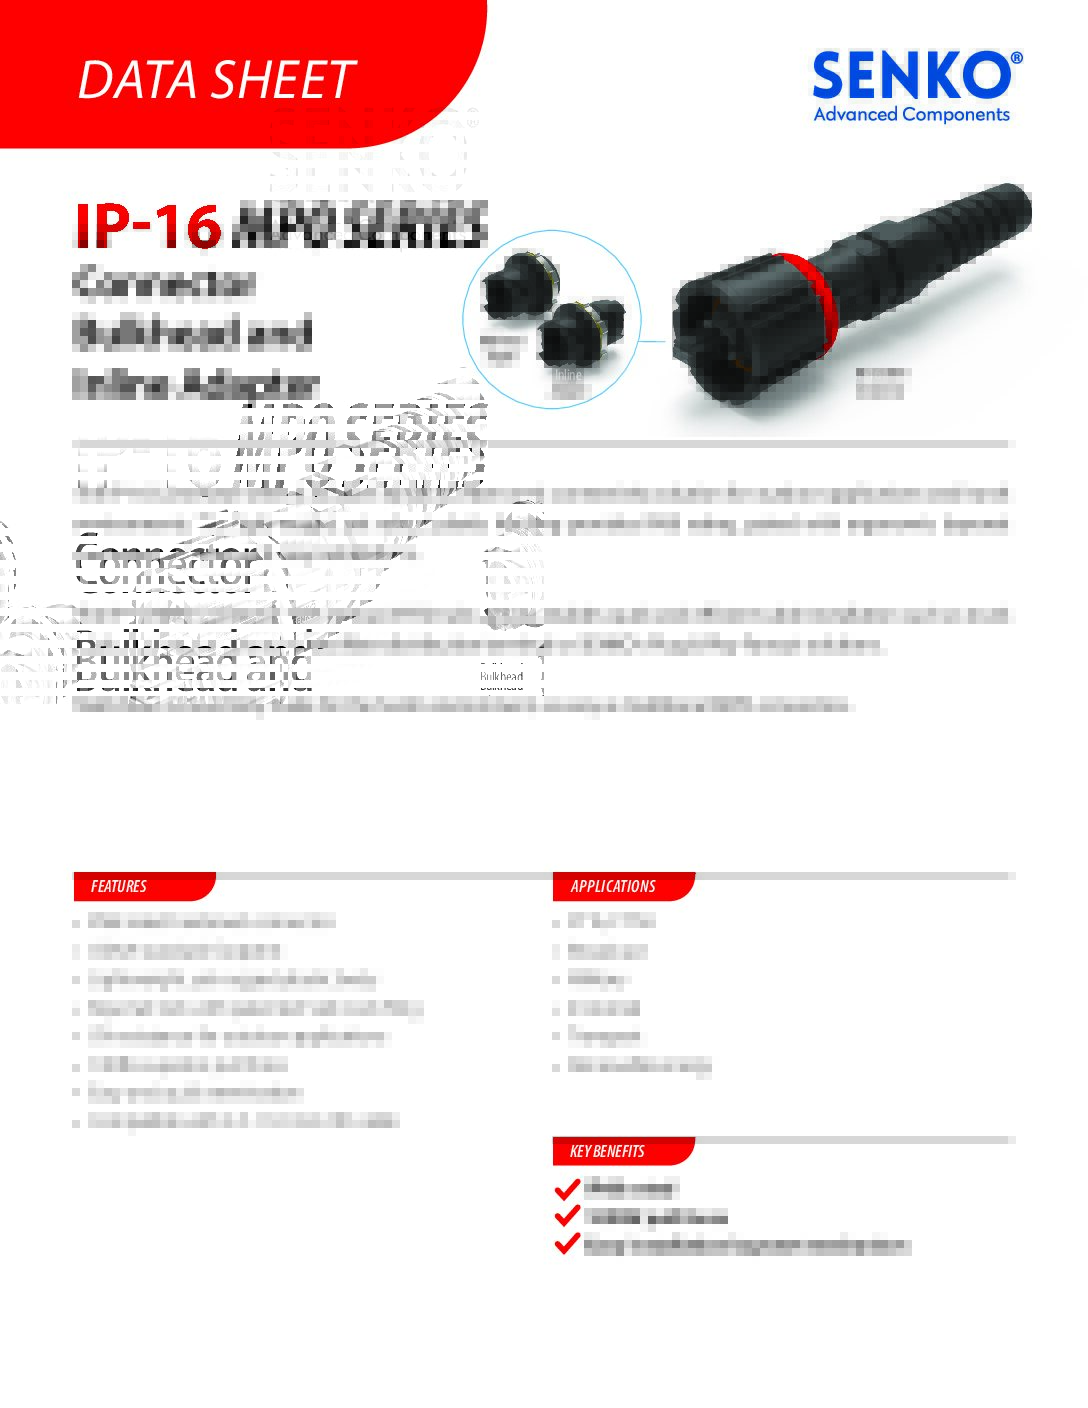 Data-Sheet_IP-16-MPO-Connector